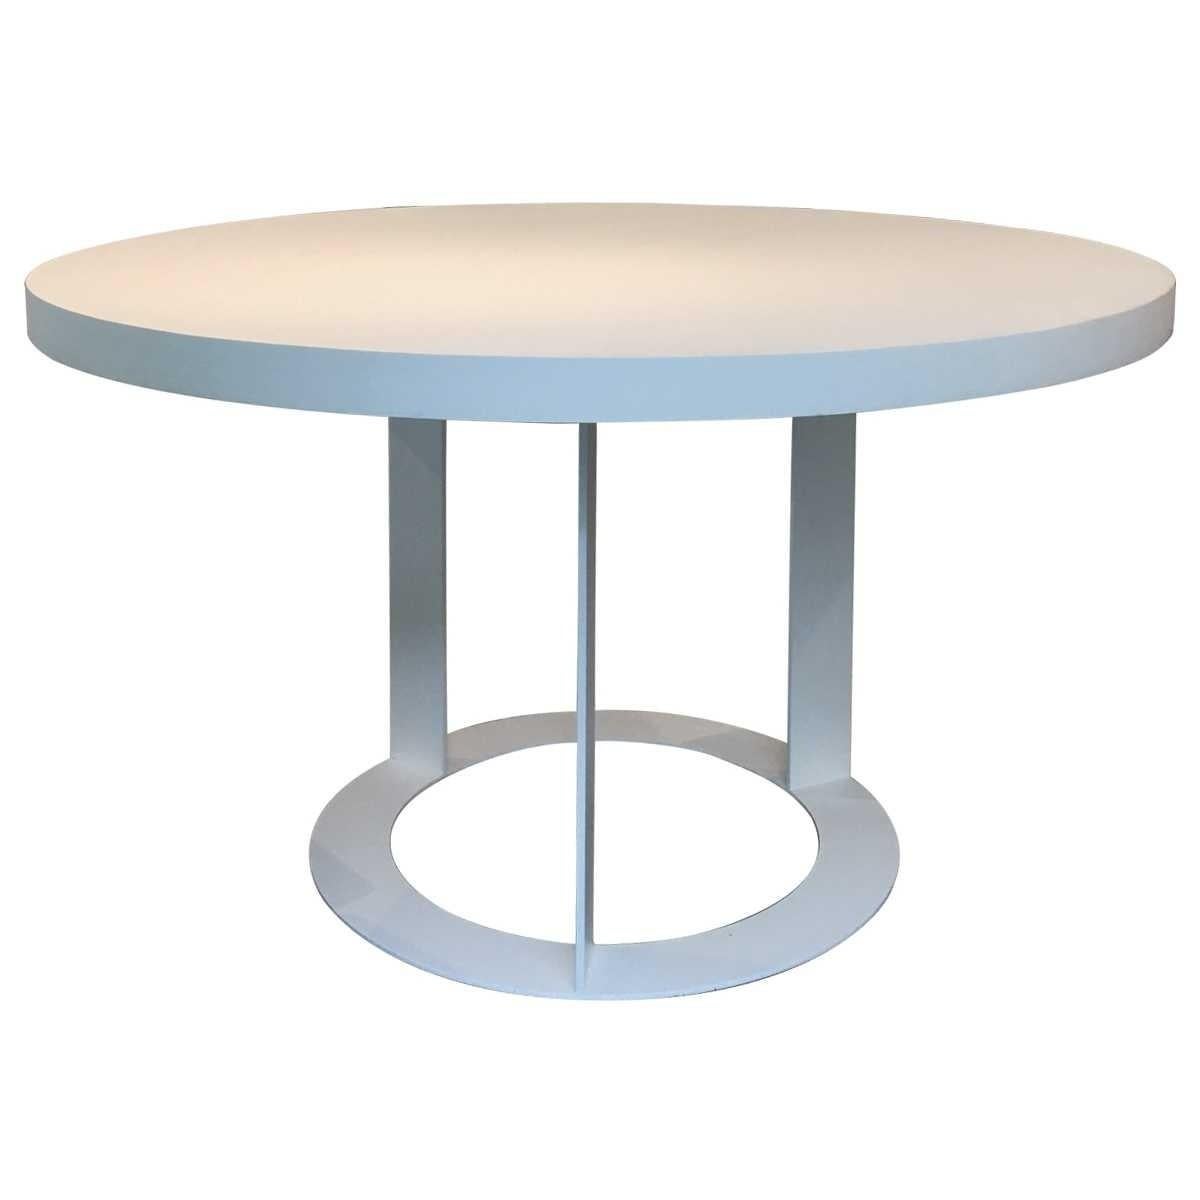 Exquisite in it's Simplicity & Versatility. Consider the UnCubed Table for your next project! Table Top available in various wood finishes, glass or marble. Custom Configurations available.